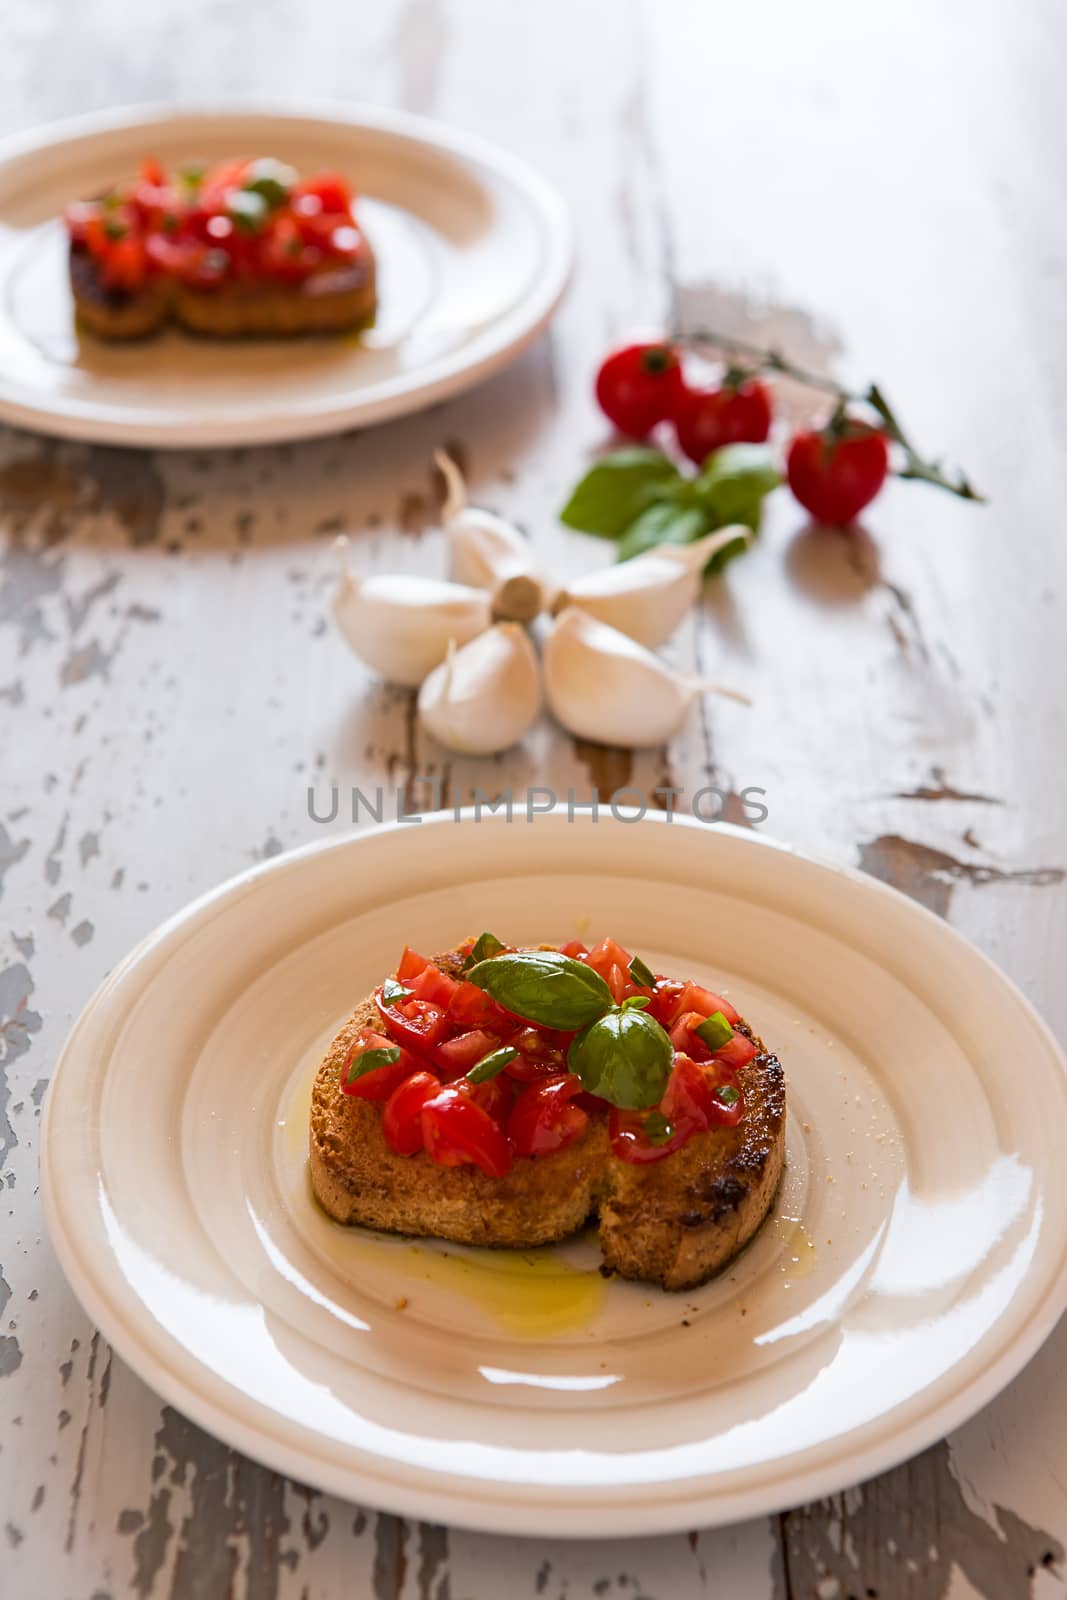 Italian bruschetta with tomato and basil over an old table